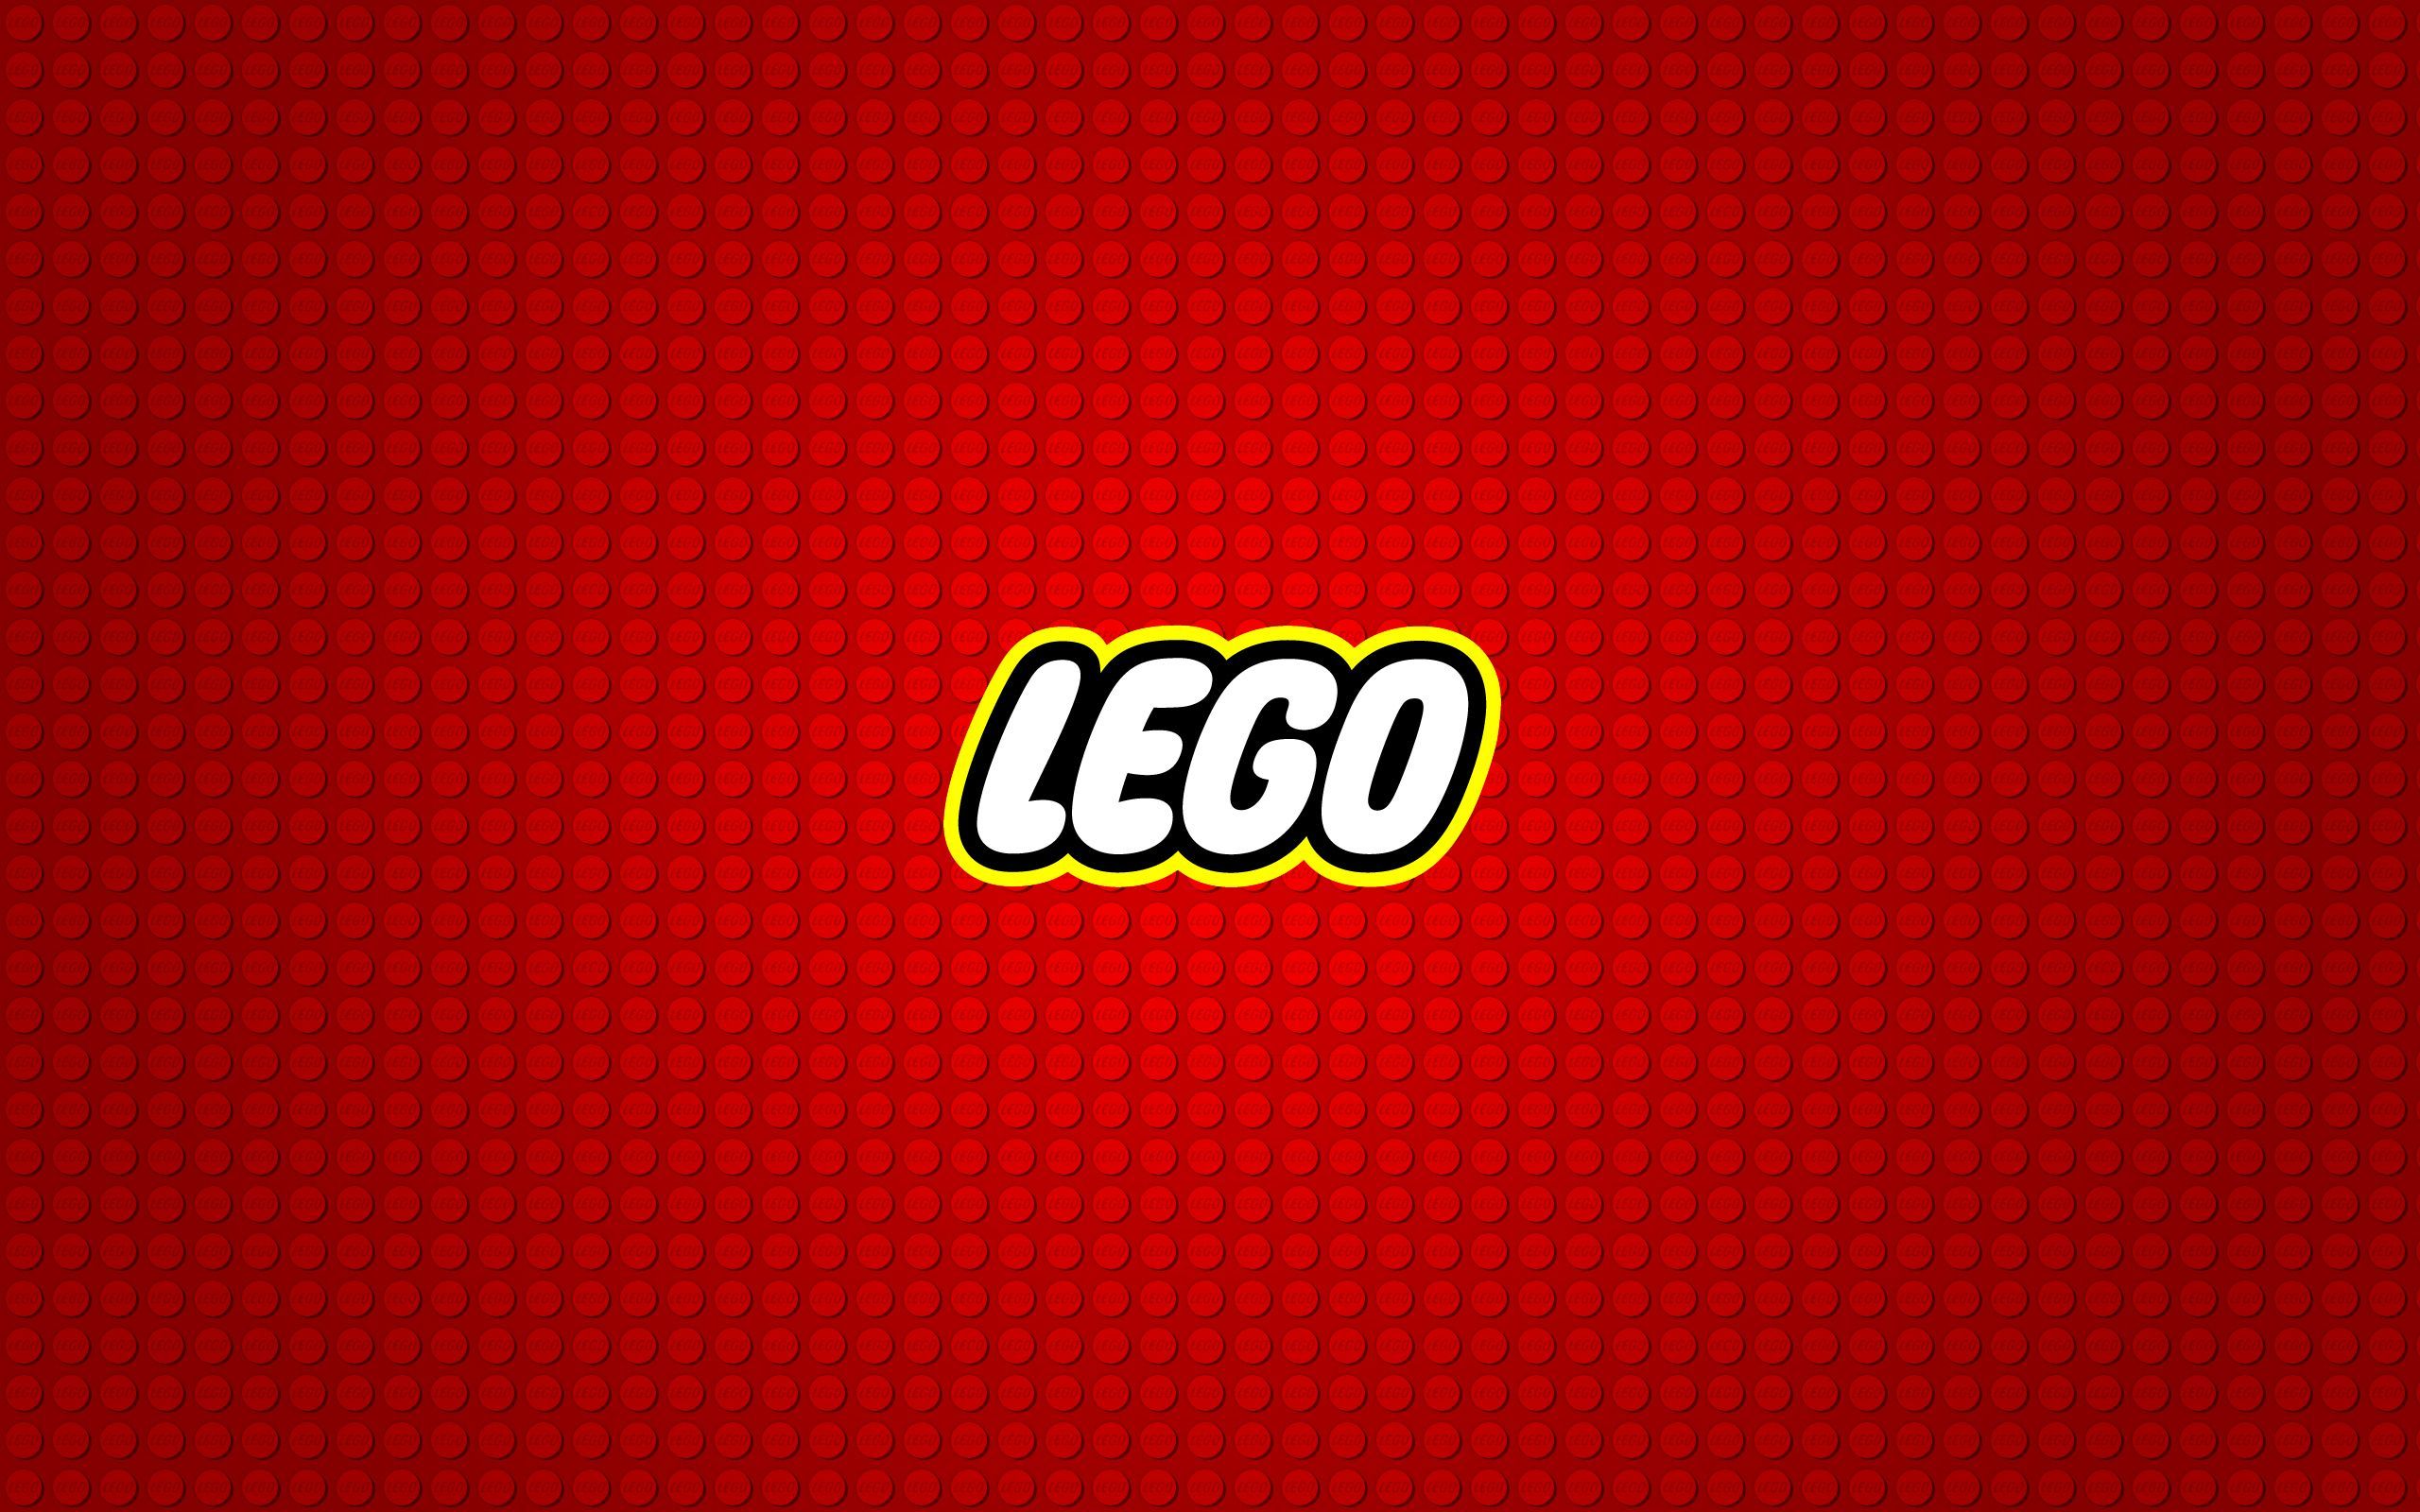 The outline around the words. Lego wallpaper, HD cool wallpaper, Lego